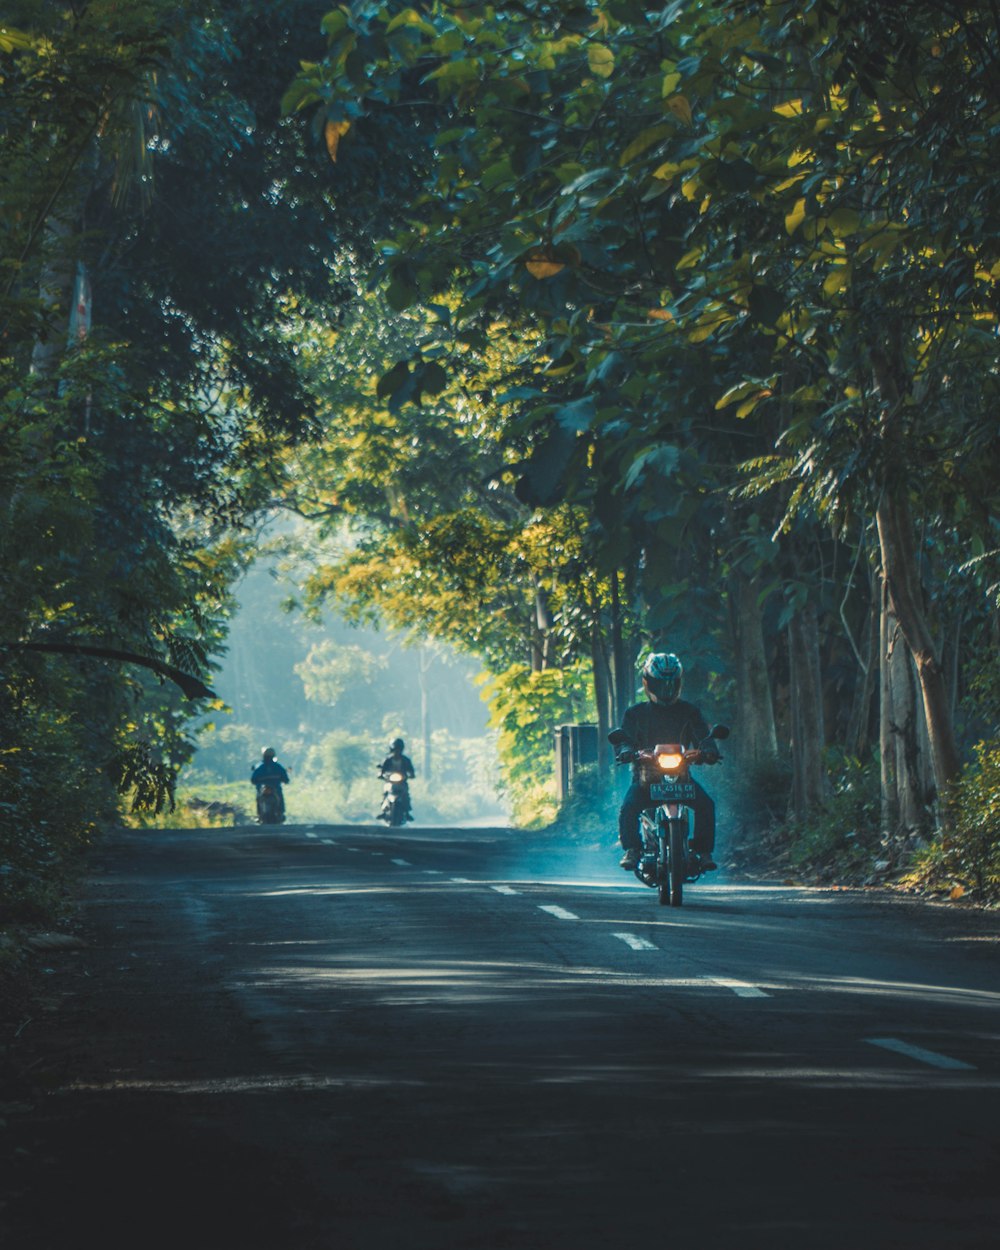 person riding on motorcycle on road between trees